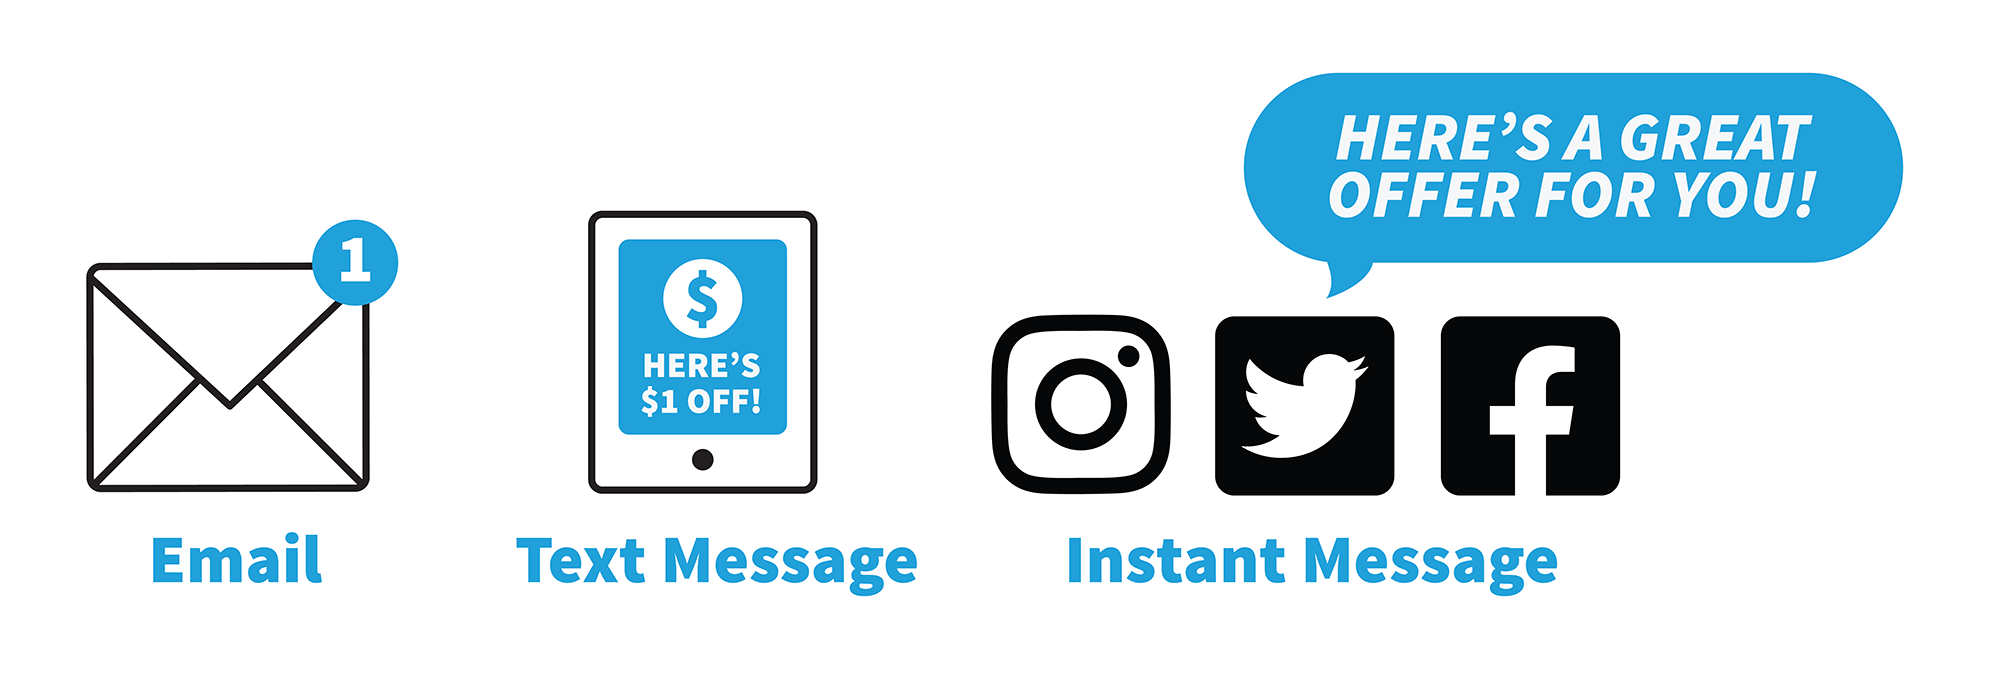 Series of three images depicting types of messages: Email, Text Messages and Instant Messages